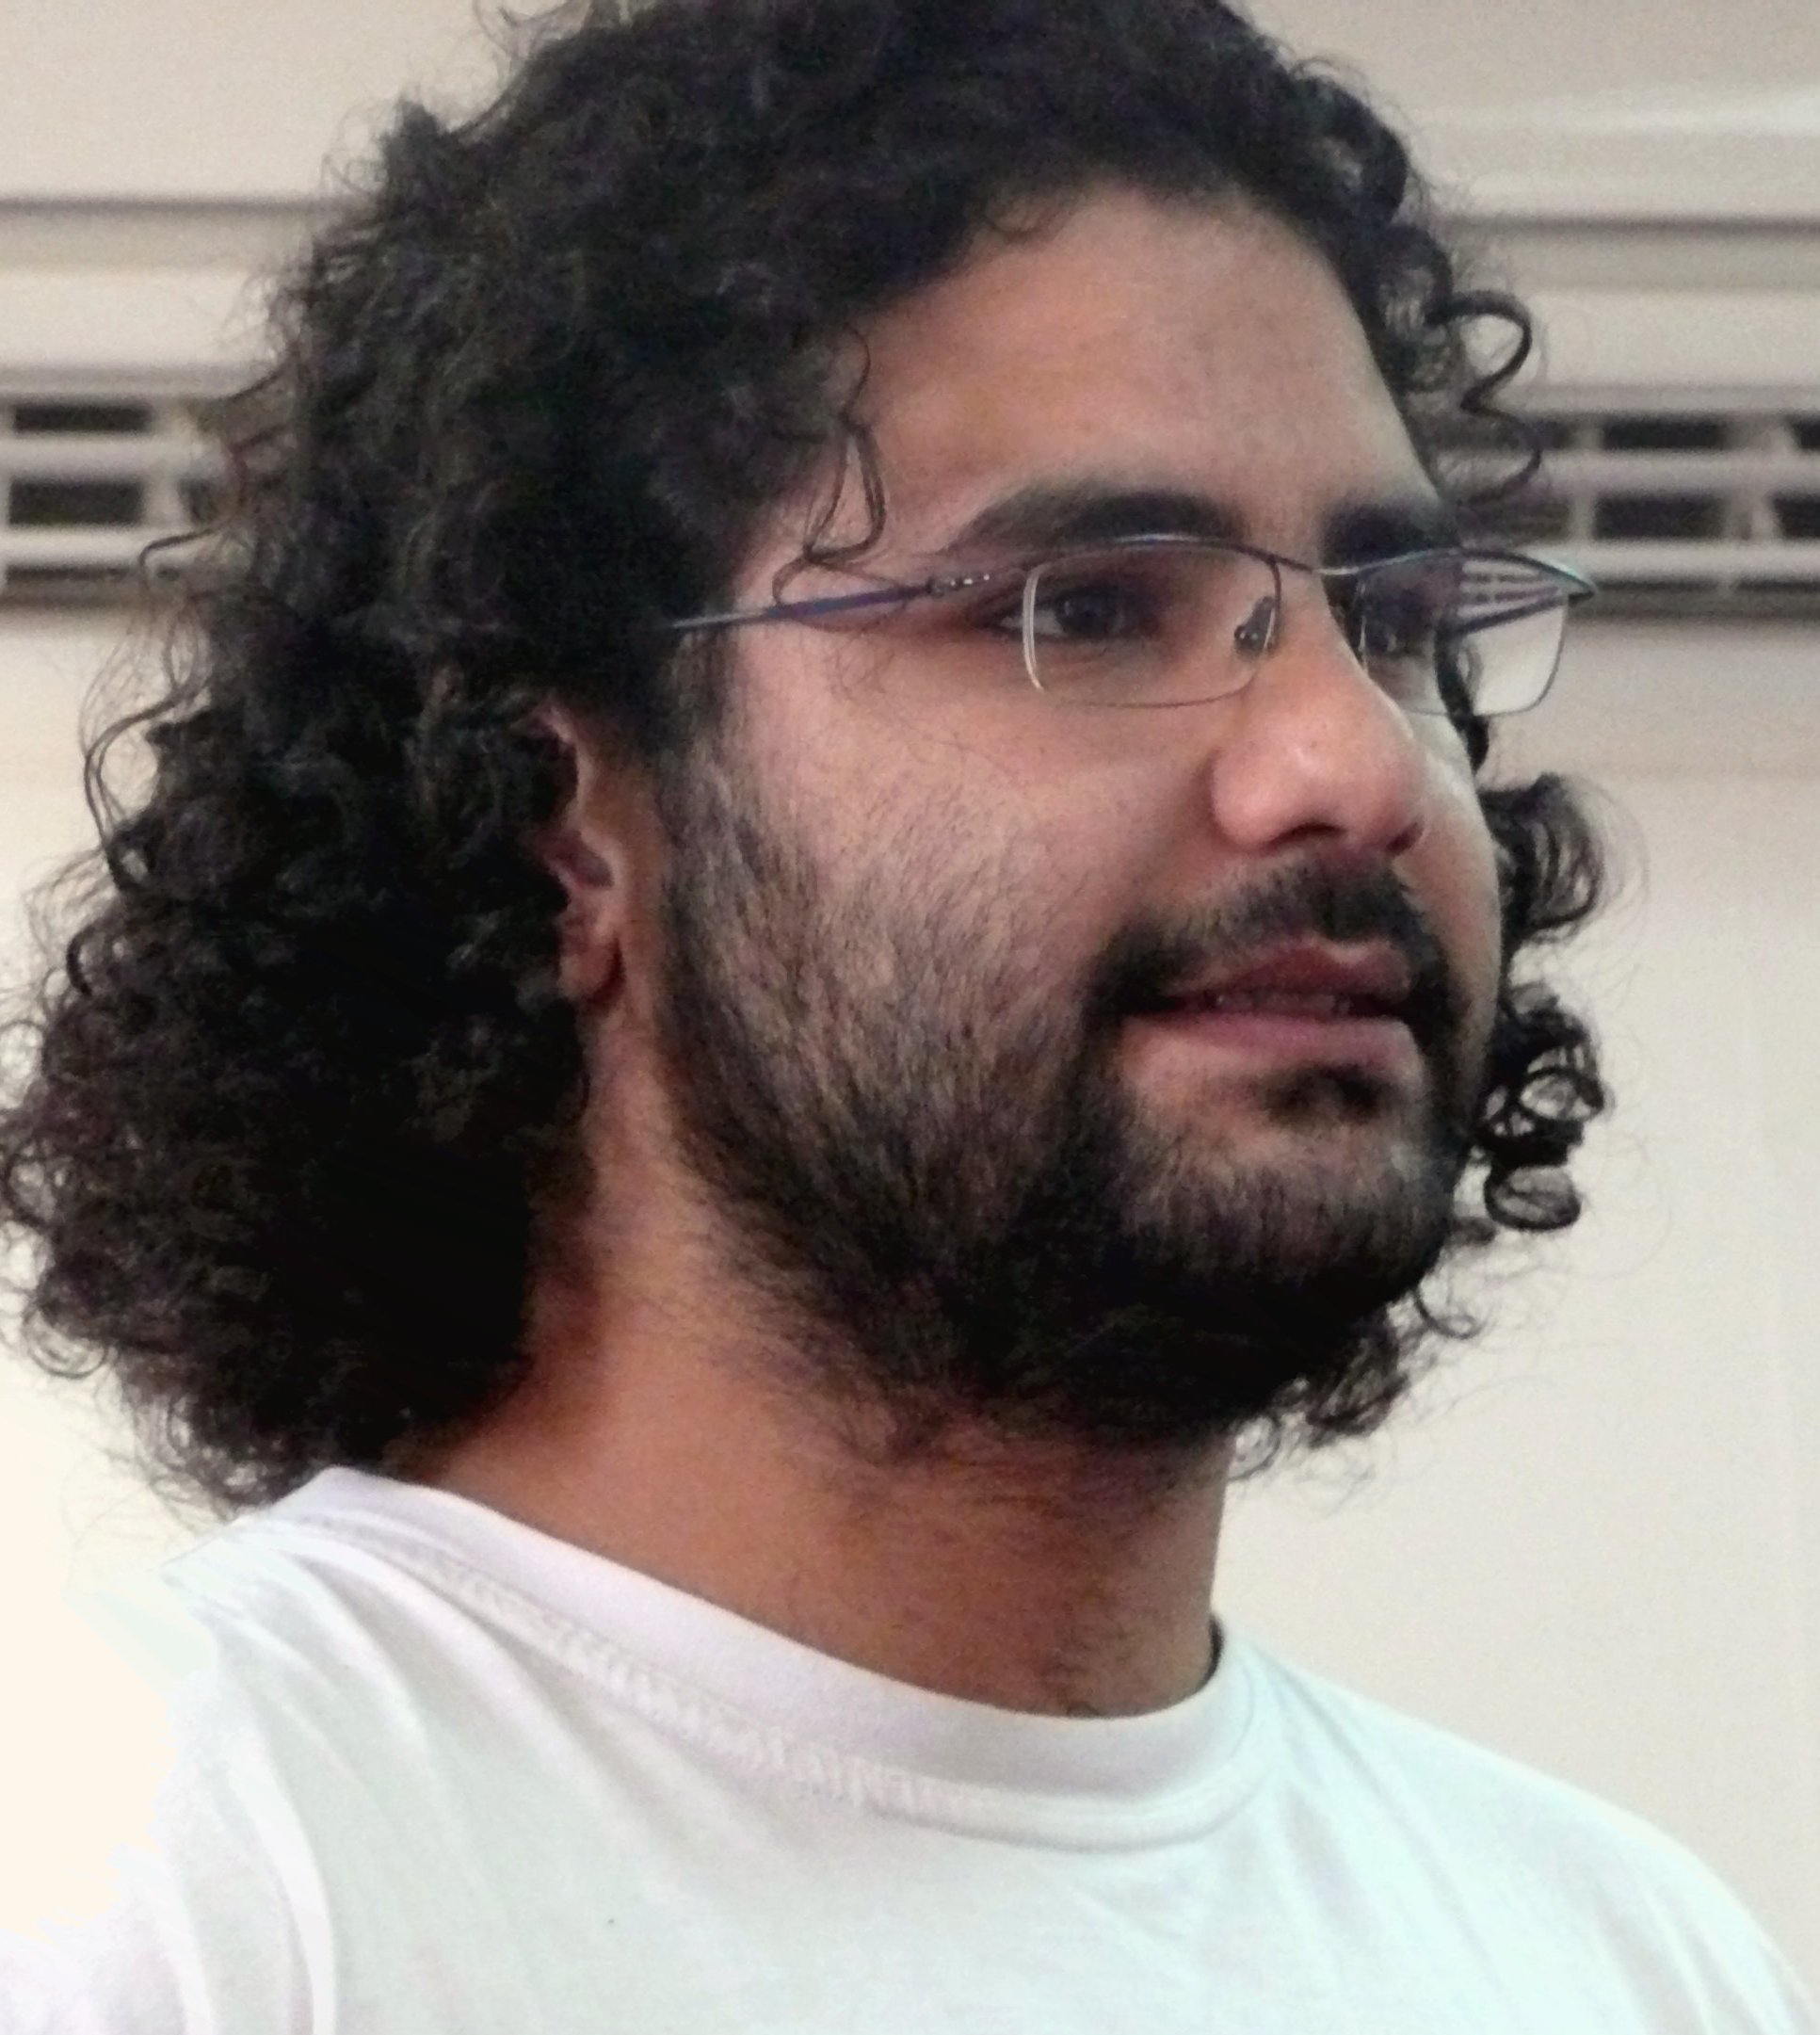 Egyptian-British hunger striker's family says they received 'proof of life' letter